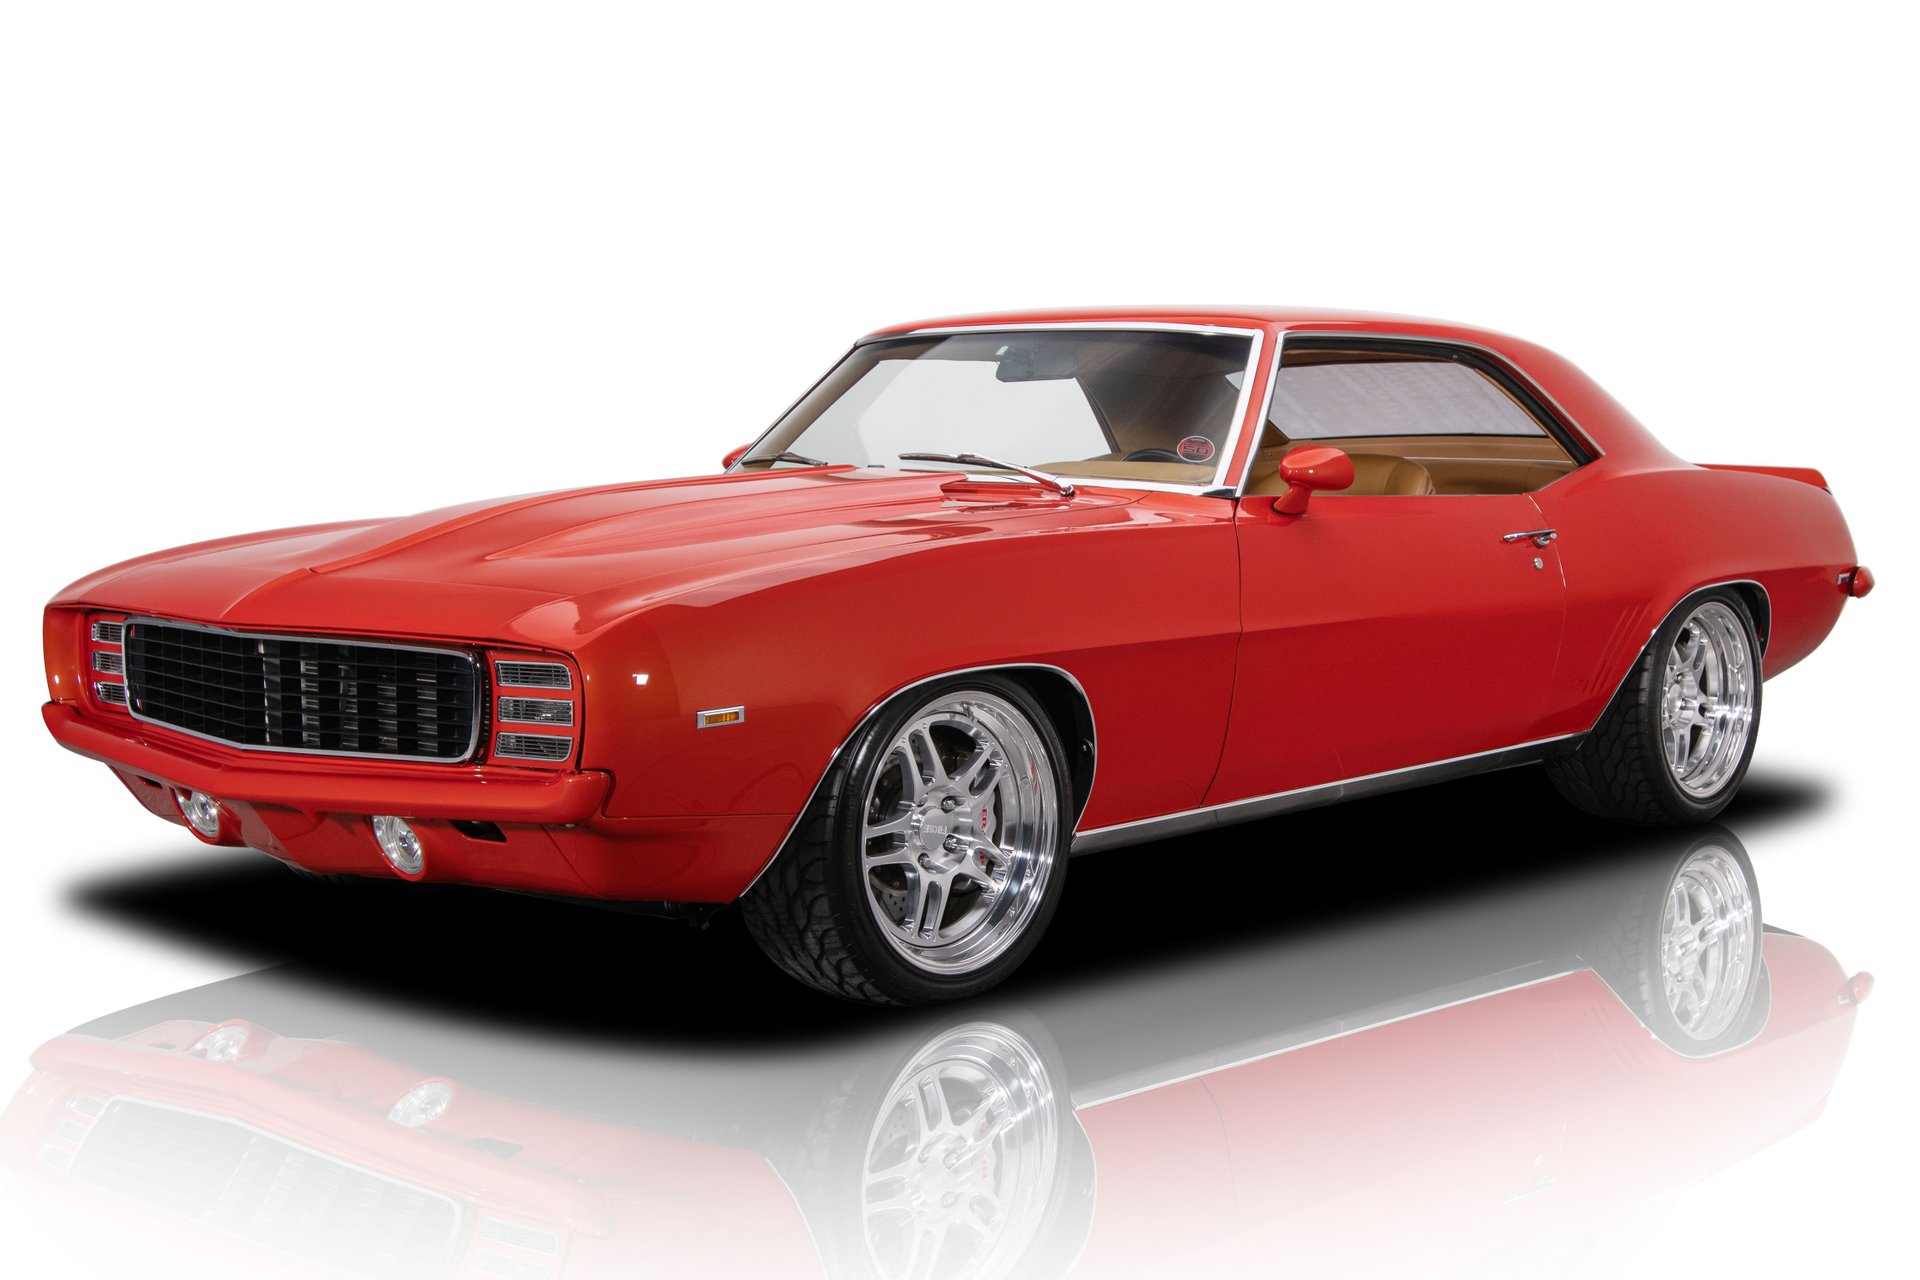 137211 1969 Chevrolet Camaro Rk Motors Classic Cars And Muscle Cars For